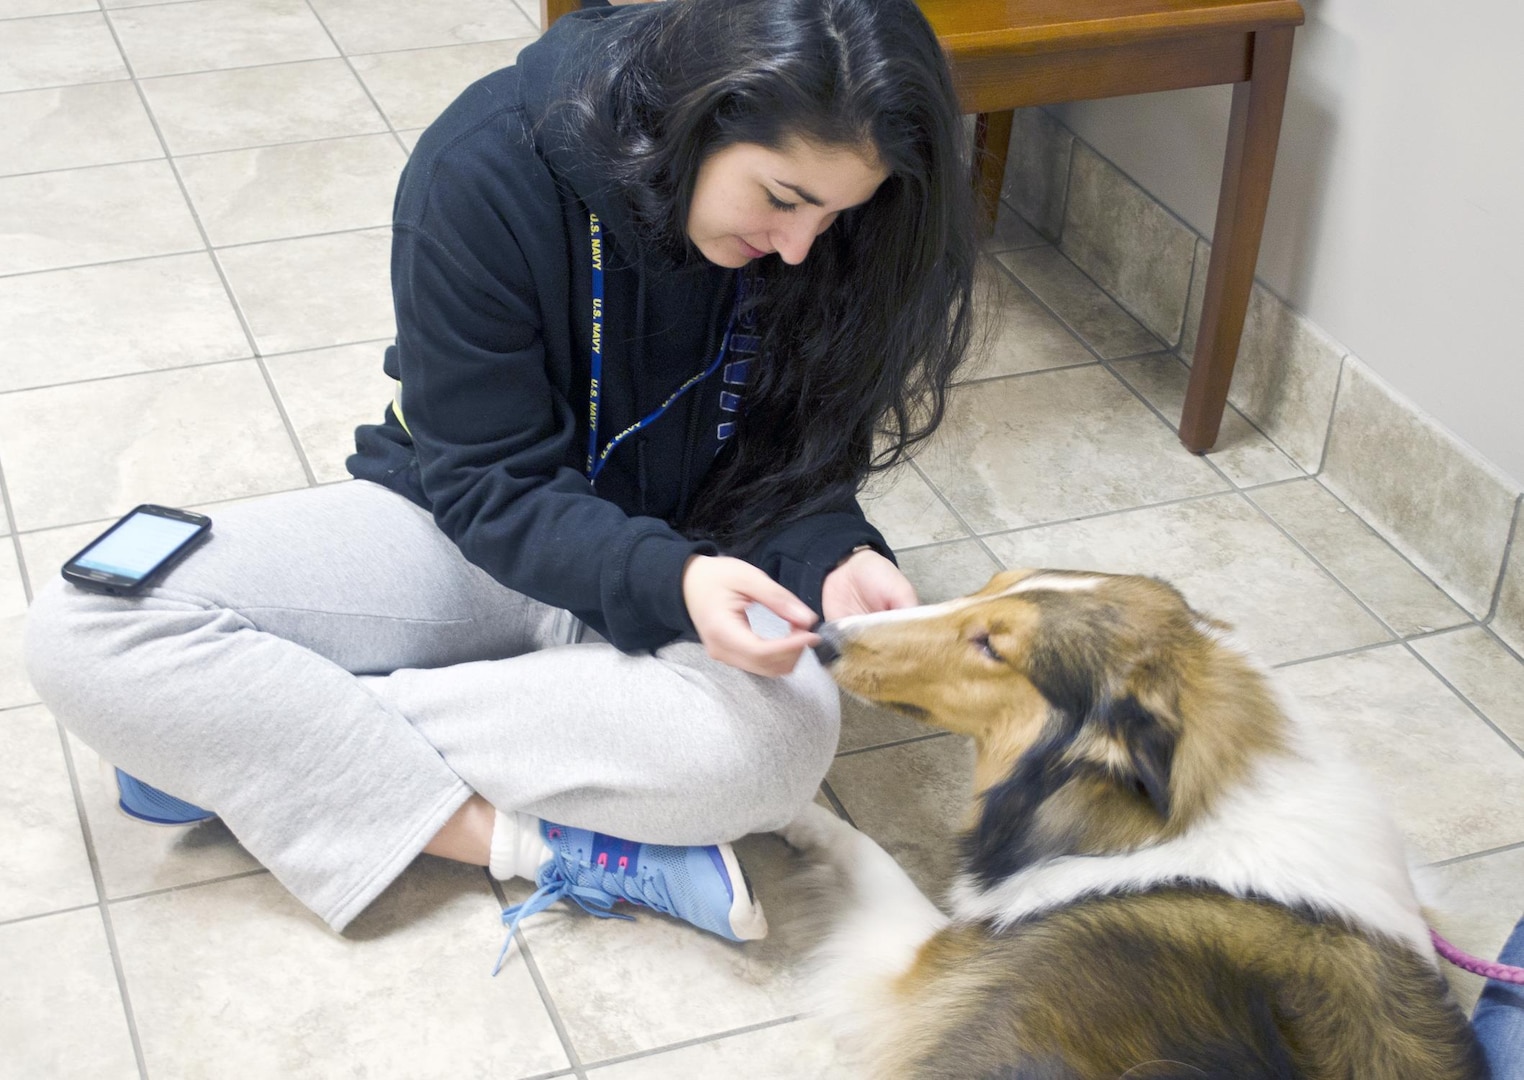 Seaman Jeniffer Rodriguez, a student in the Basic Medical Technician Corpsman Program at the Medical Education and Training Campus on Joint Base San Antonio-Fort Sam Houston, pets Lady, one of the Navy Chaplain Lt. Cmdr. Scott Adams’ certified therapy dogs, during “Pet Therapy” night at the Navy student barracks.